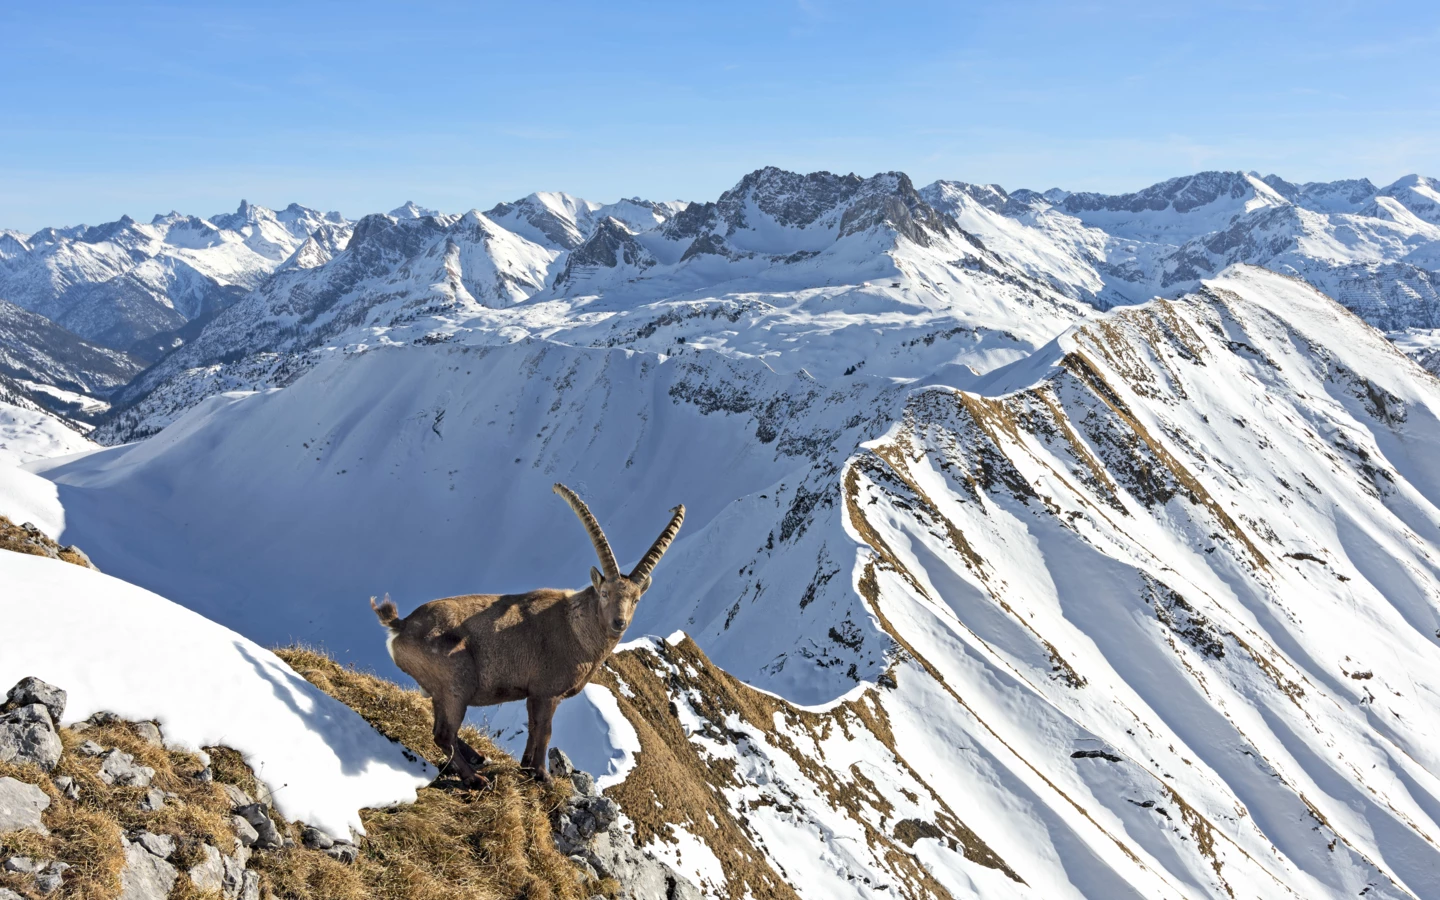 ibex-in-front-of-snowy-mountains-at-a-sunny-day